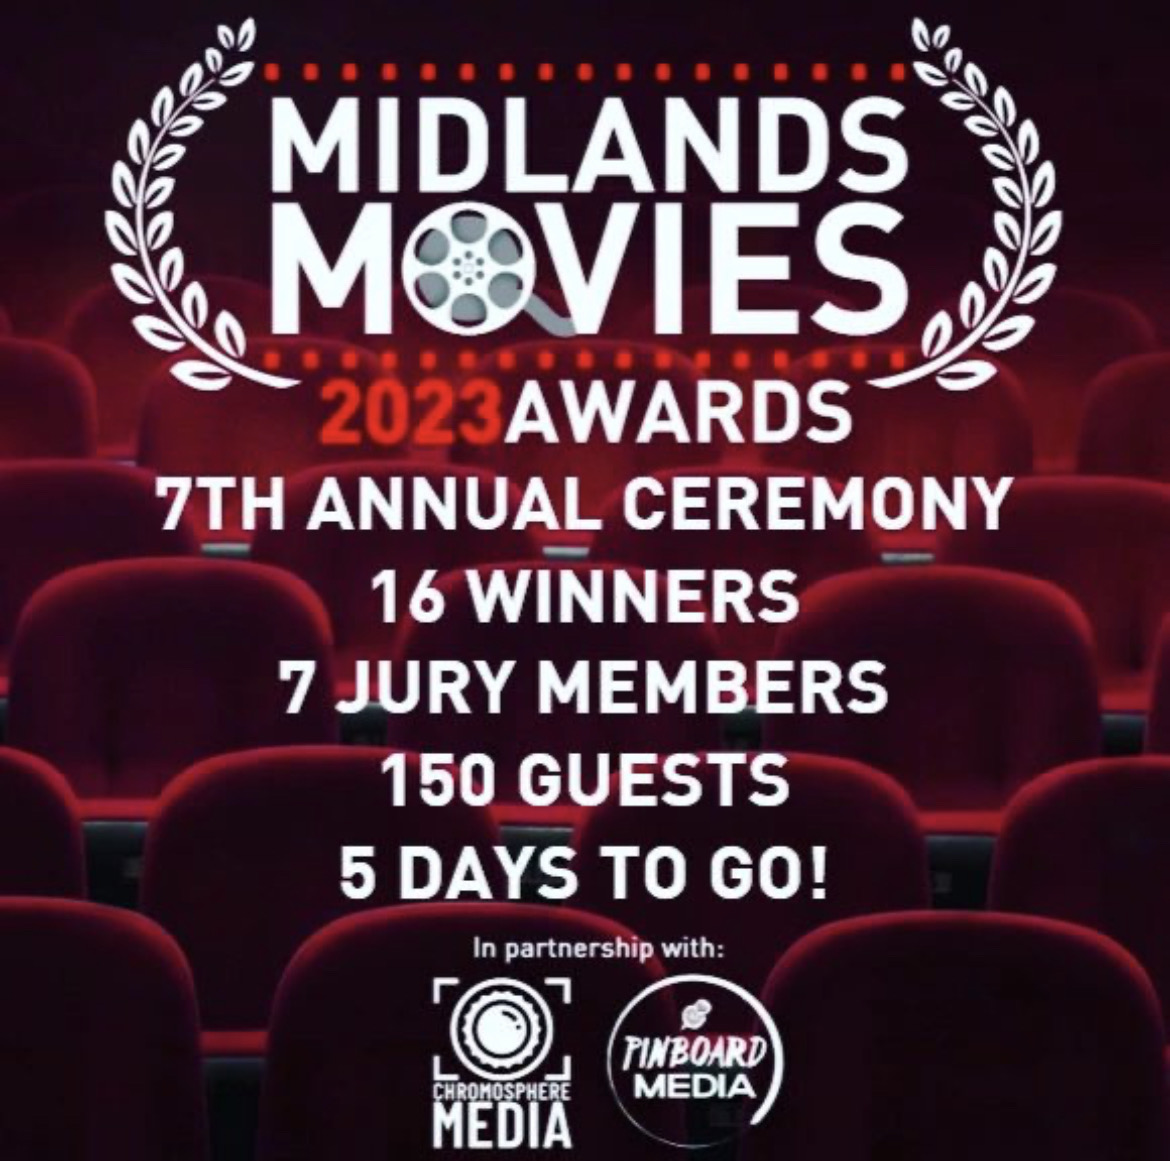 Who's excited for the 7th annual @MidlandsMovies Awards? 😍

We're rooting for all the nominees from the West Mids (especially the Brummies🤫)

Get your tickets for the 10th June here midlandsmovies.com/awards-tickets